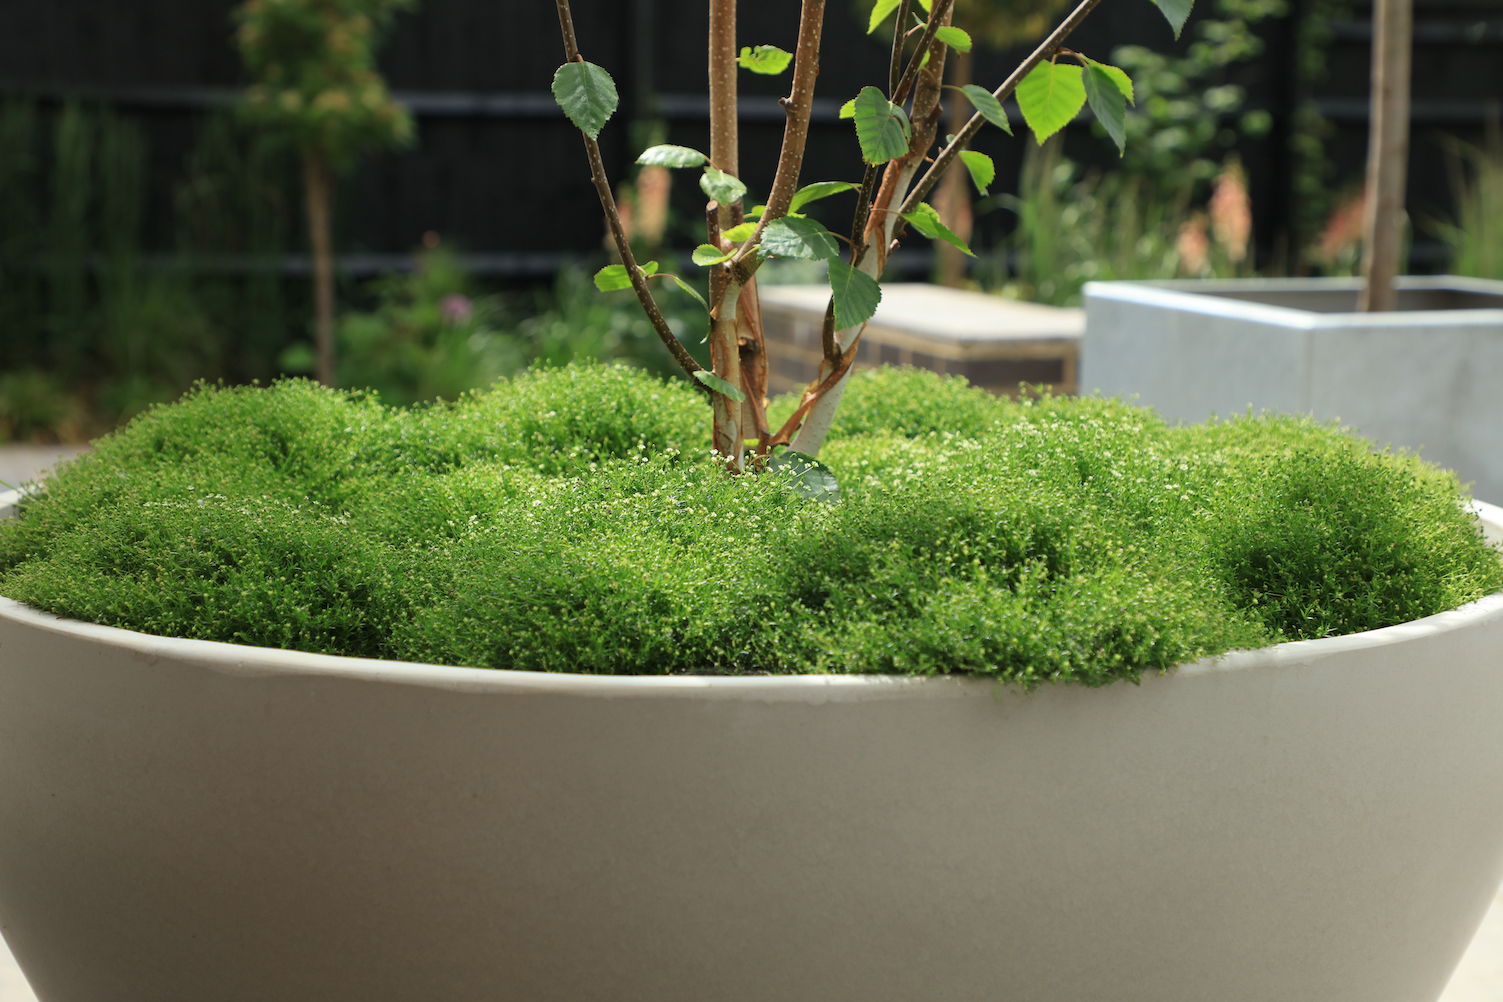 Planter filled with moss